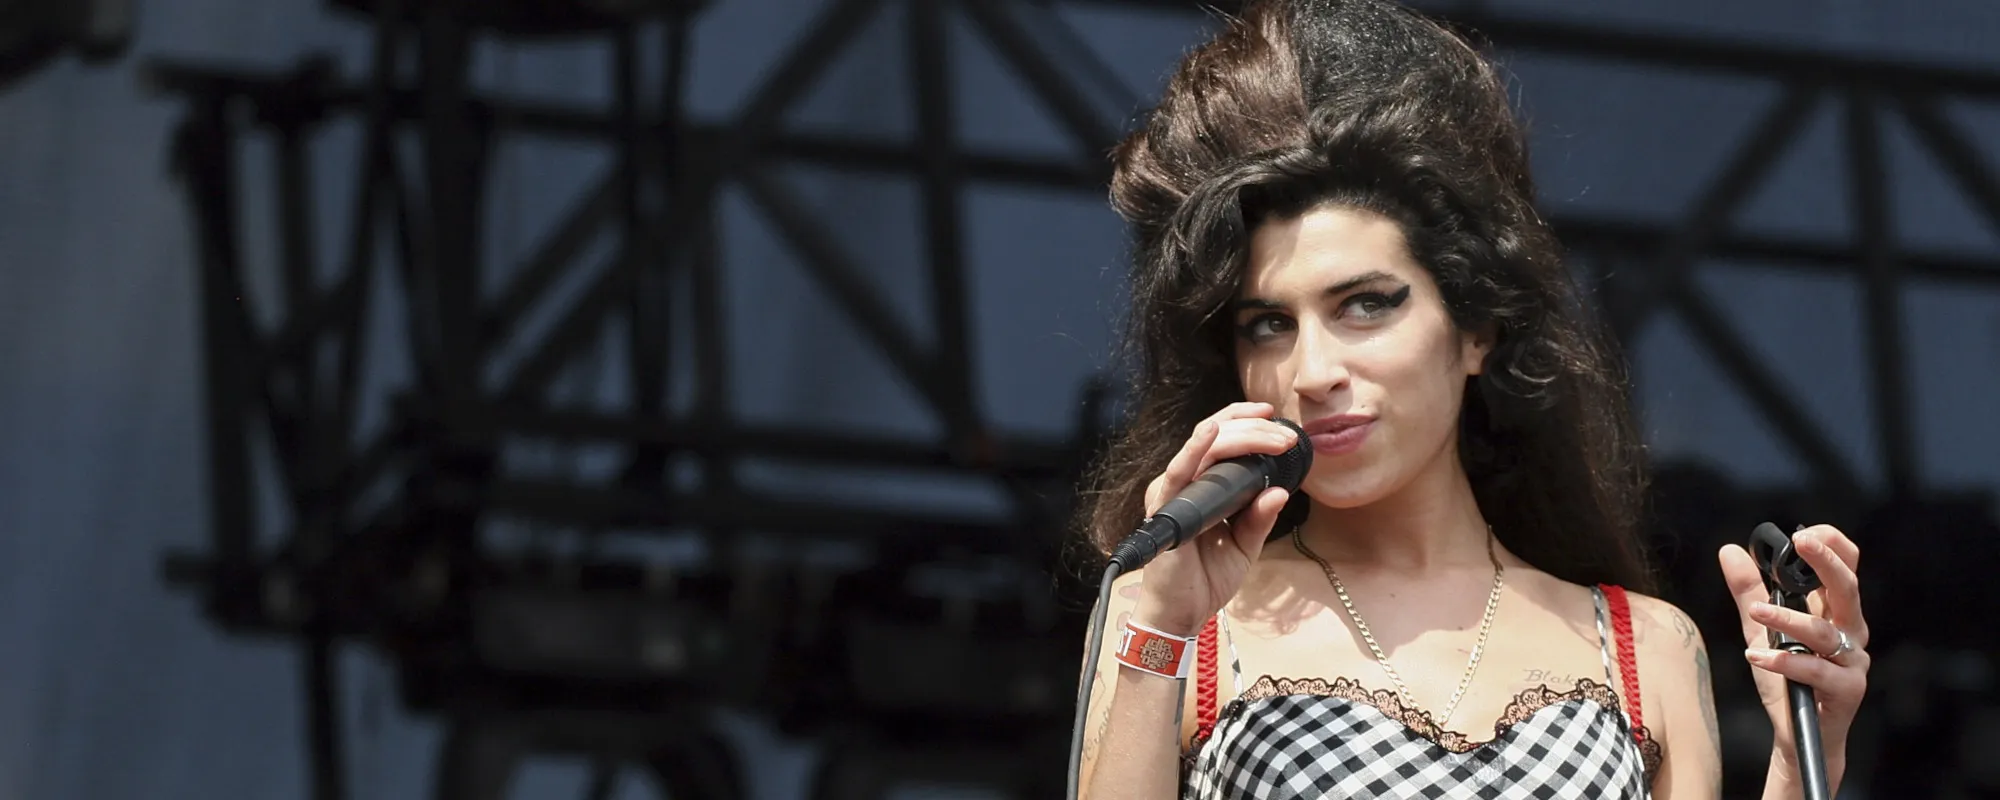 Amy Winehouse Band Reunites to Celebrate Late Singer’s 40th Birthday